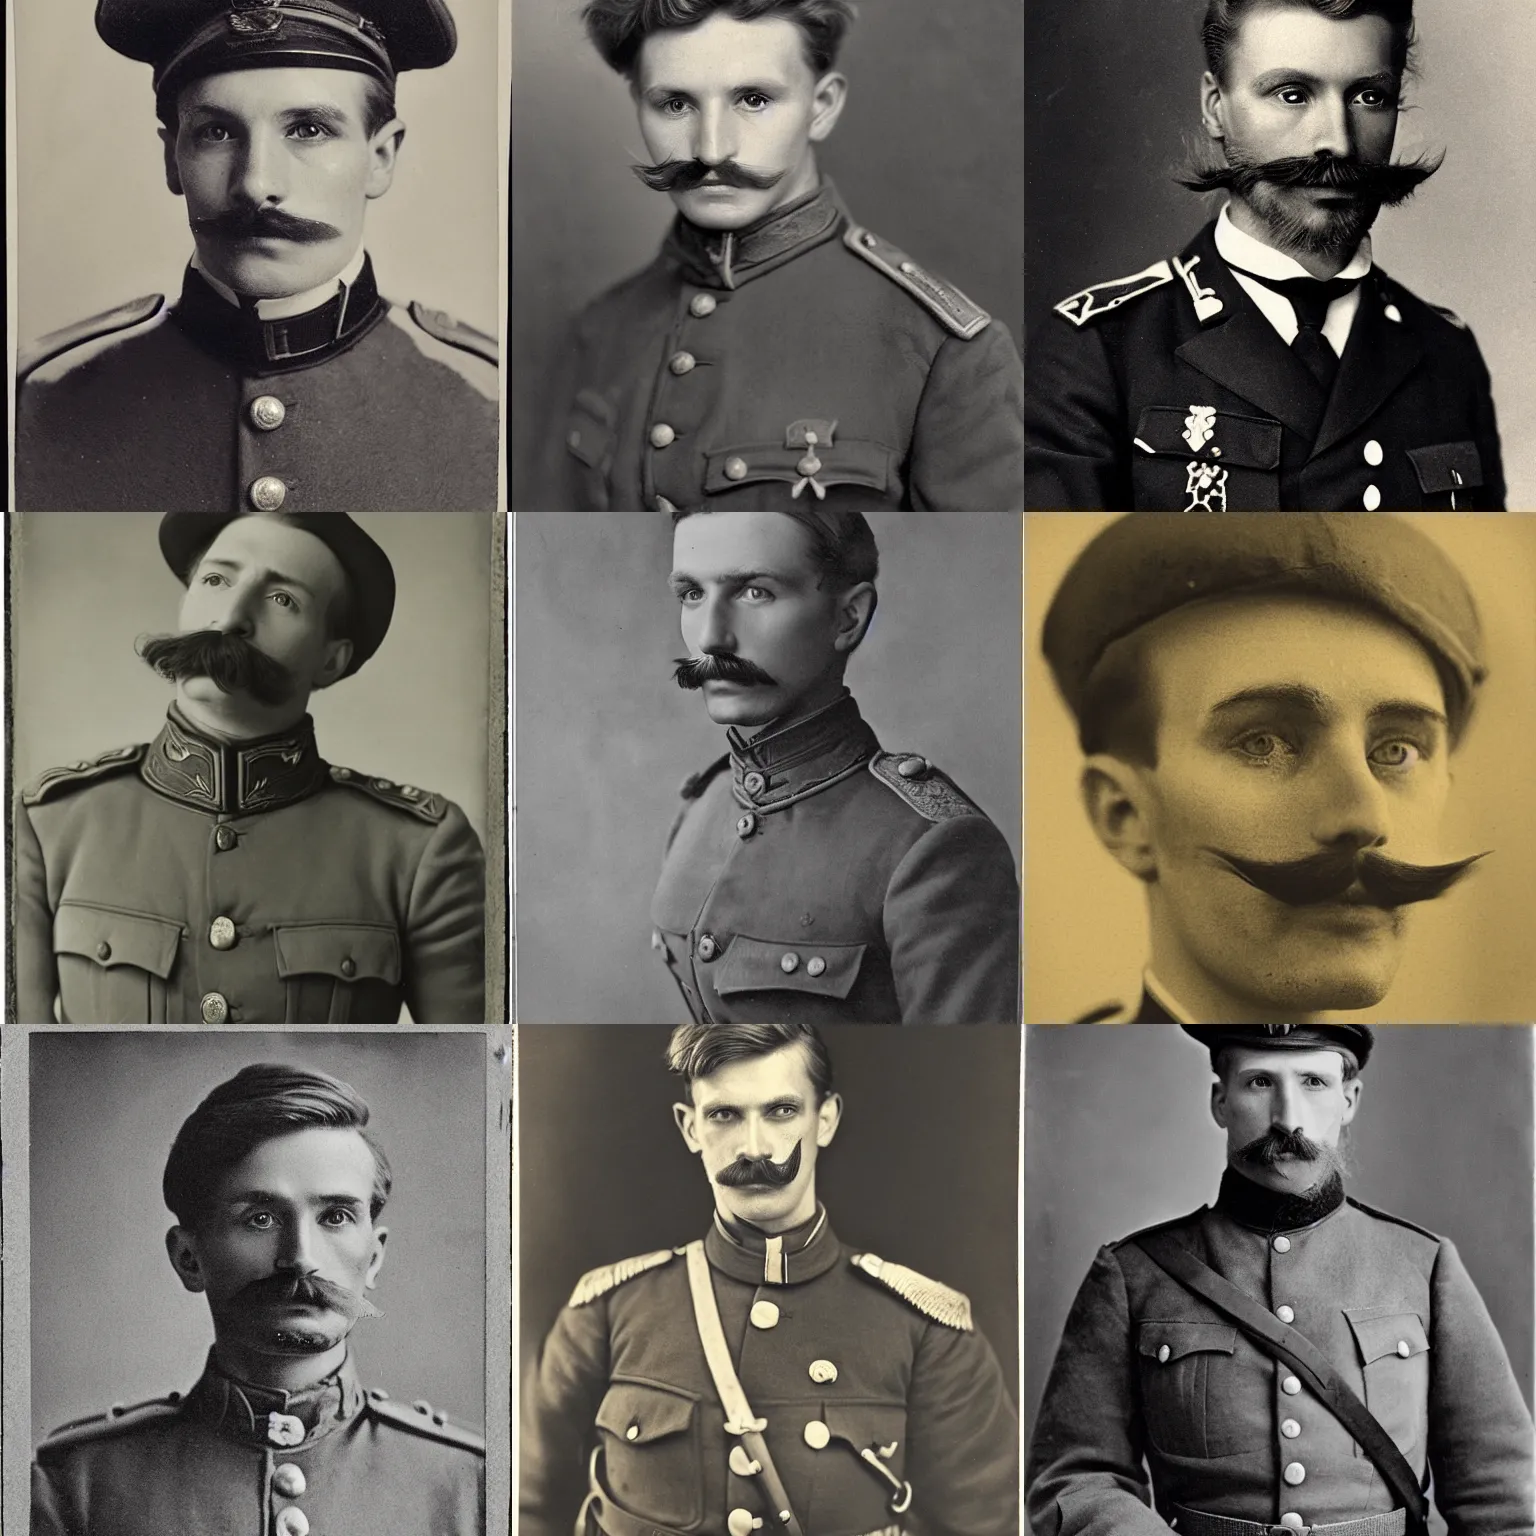 Prompt: late 1 9 th century, austro - hungarian!!! soldier ( handsome, 2 7 years old, redhead michał zebrowski with a small mustache ). old, detailed, hyperrealistic, 1 9 th century, full length portrait by munkacsi, yousuf karsh, and mednyanszky laszlo